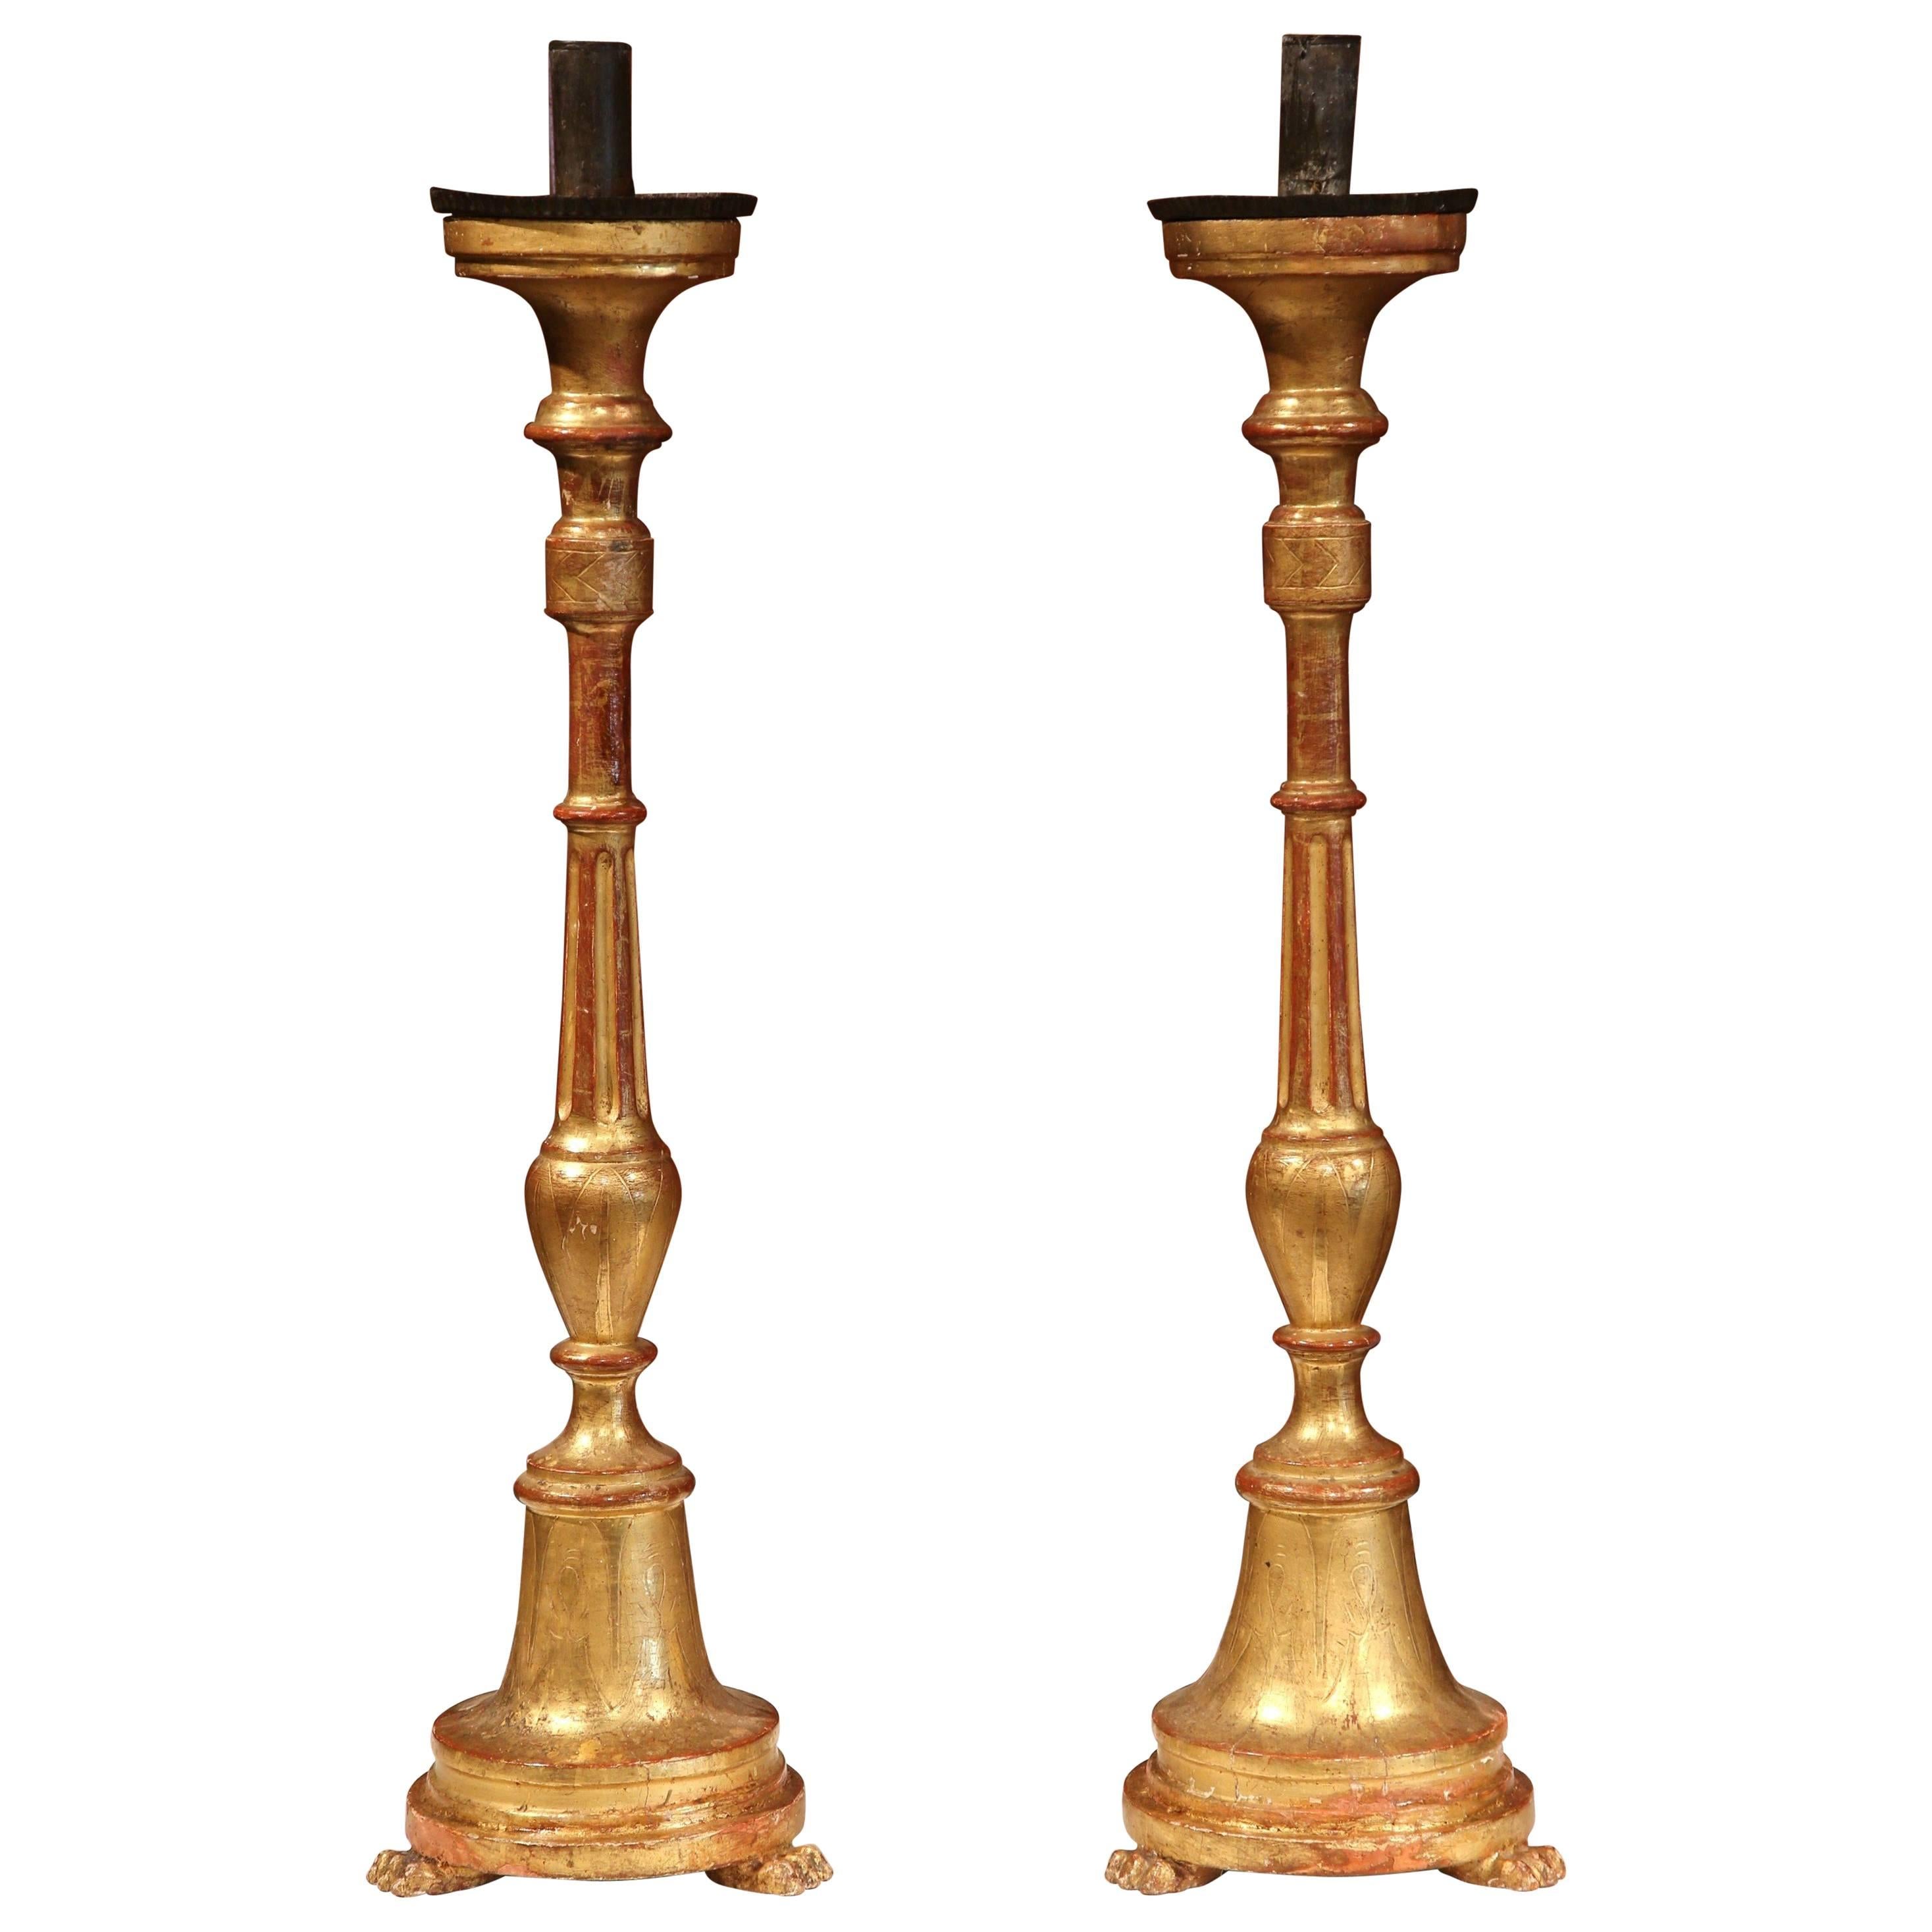 Pair of 19th Century Italian Hand-Carved Wooden Gold Leaf Altar Candlesticks